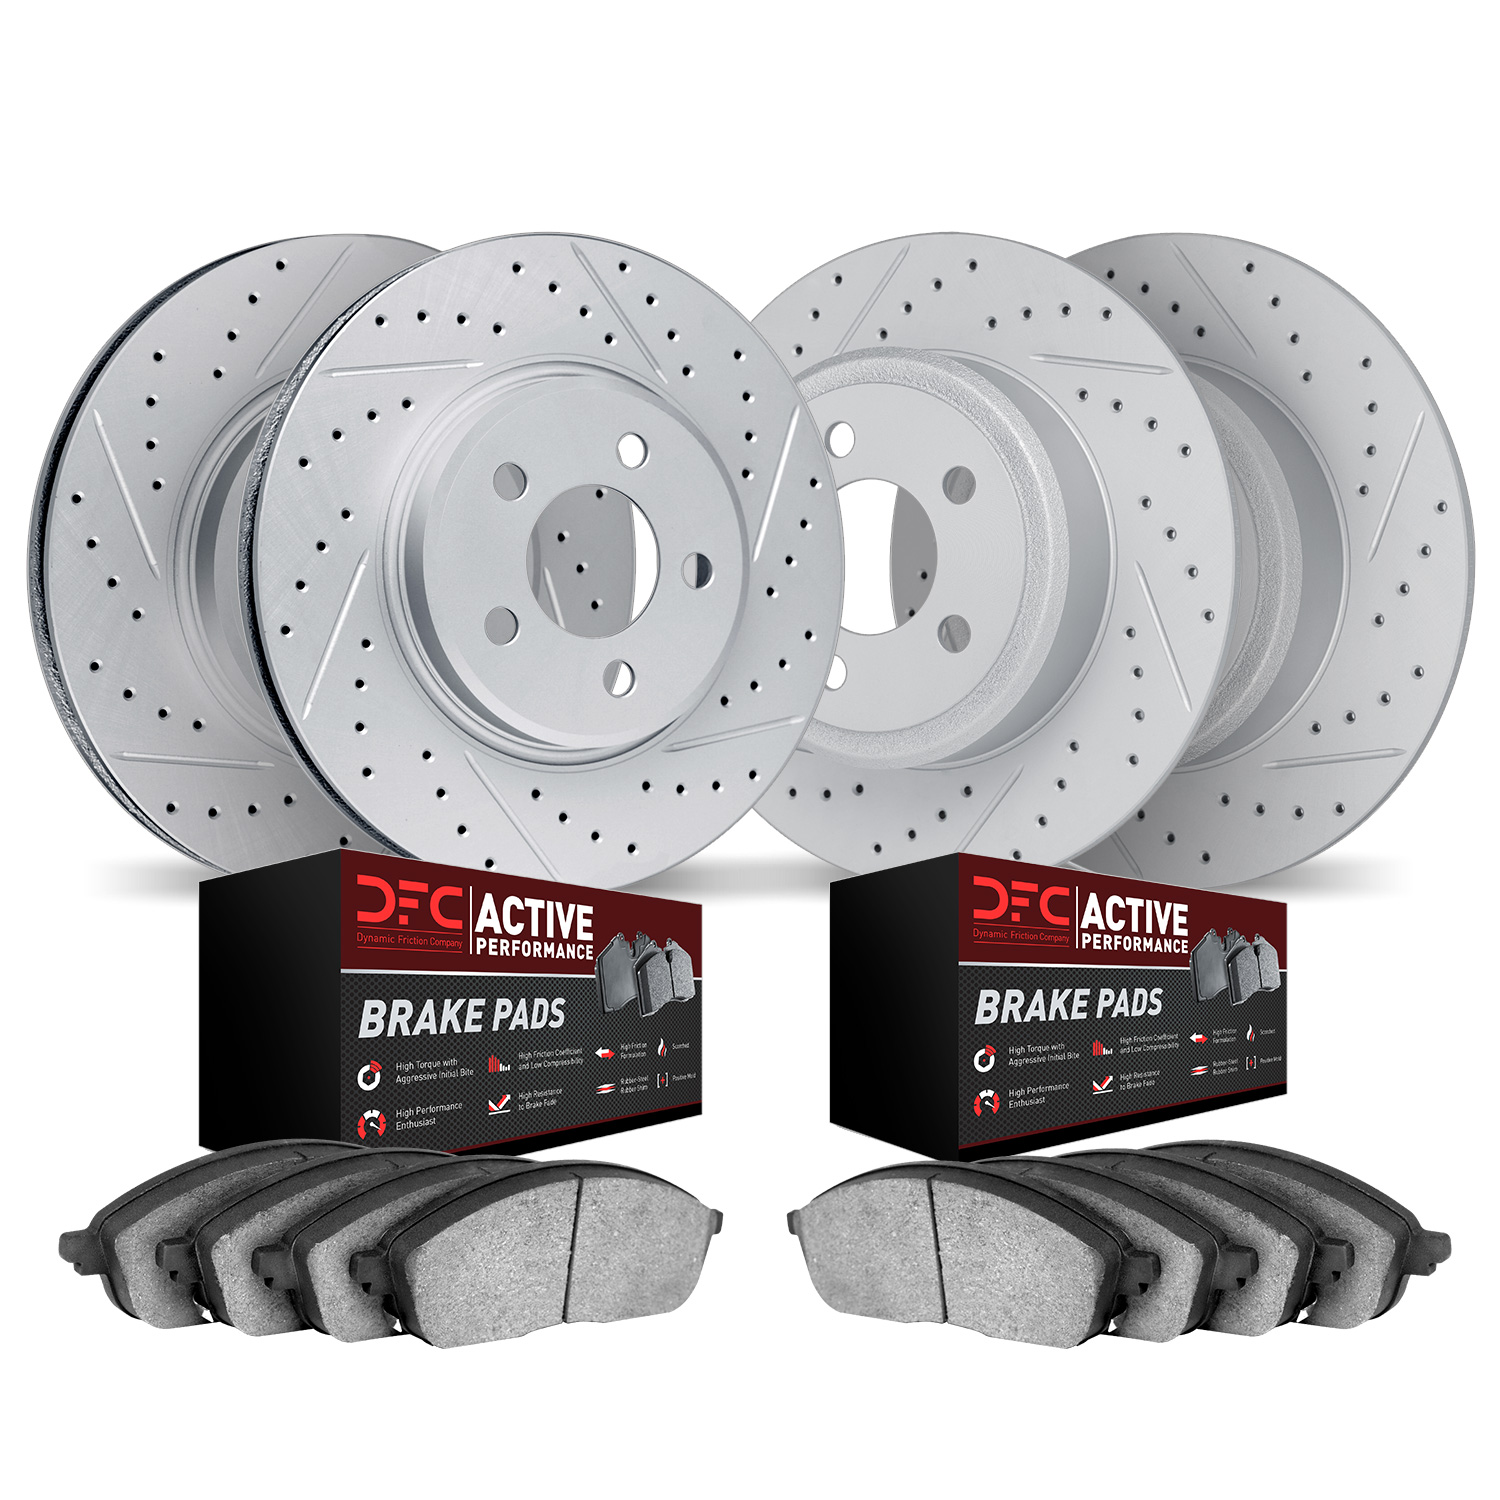 2704-13004 Geoperformance Drilled/Slotted Brake Rotors with Active Performance Pads Kit, 2003-2007 GM, Position: Front and Rear